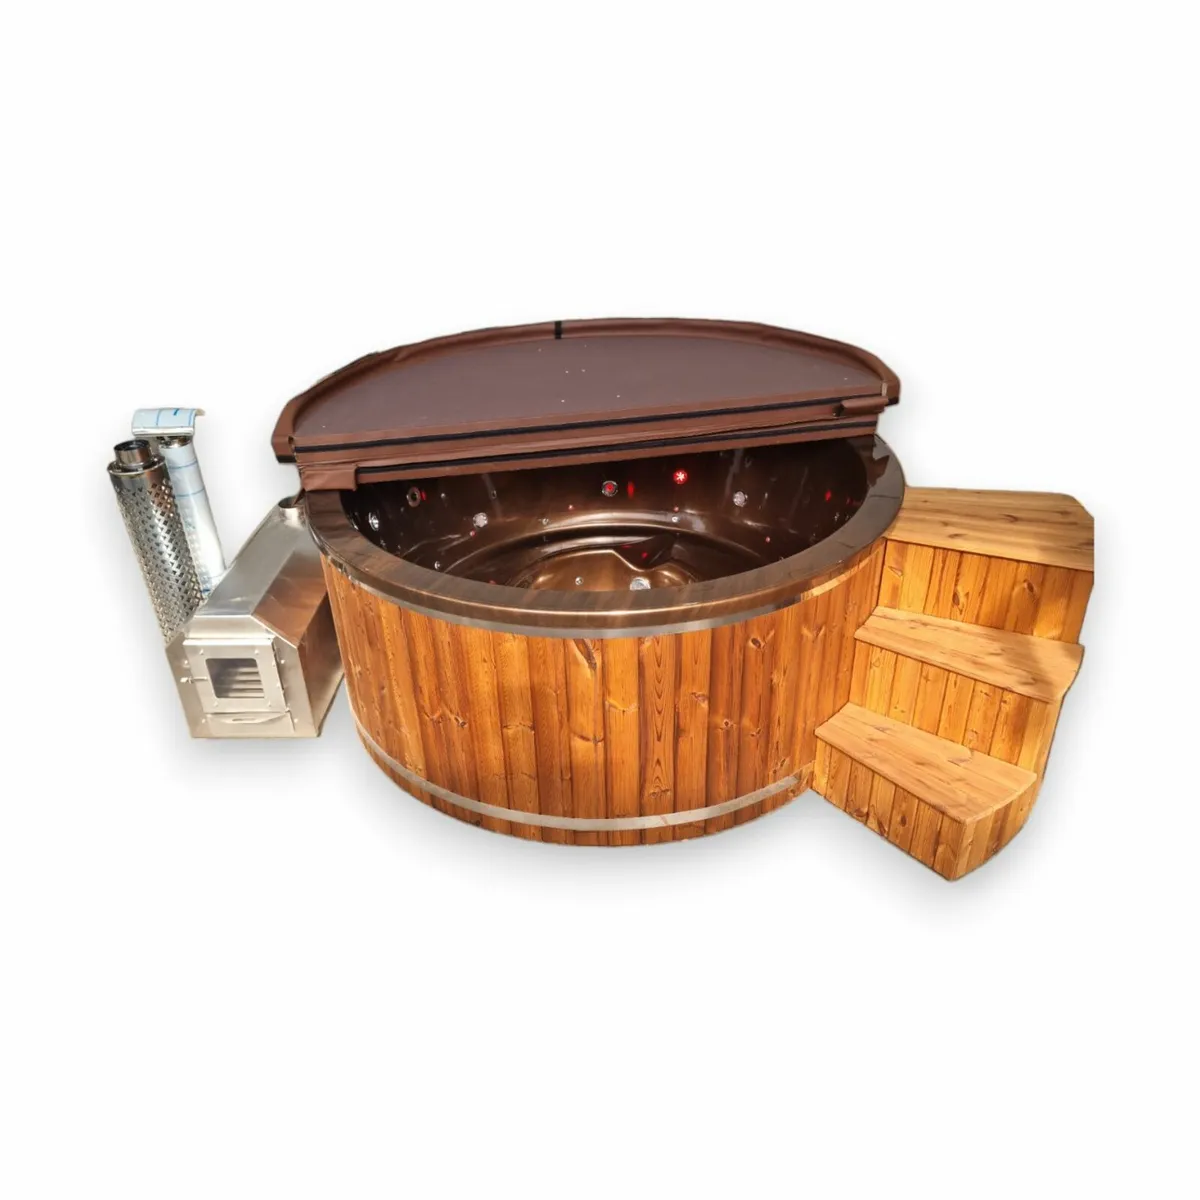 Hot tub, acrylic brown marble ,wood fired jacuzzi - Image 1